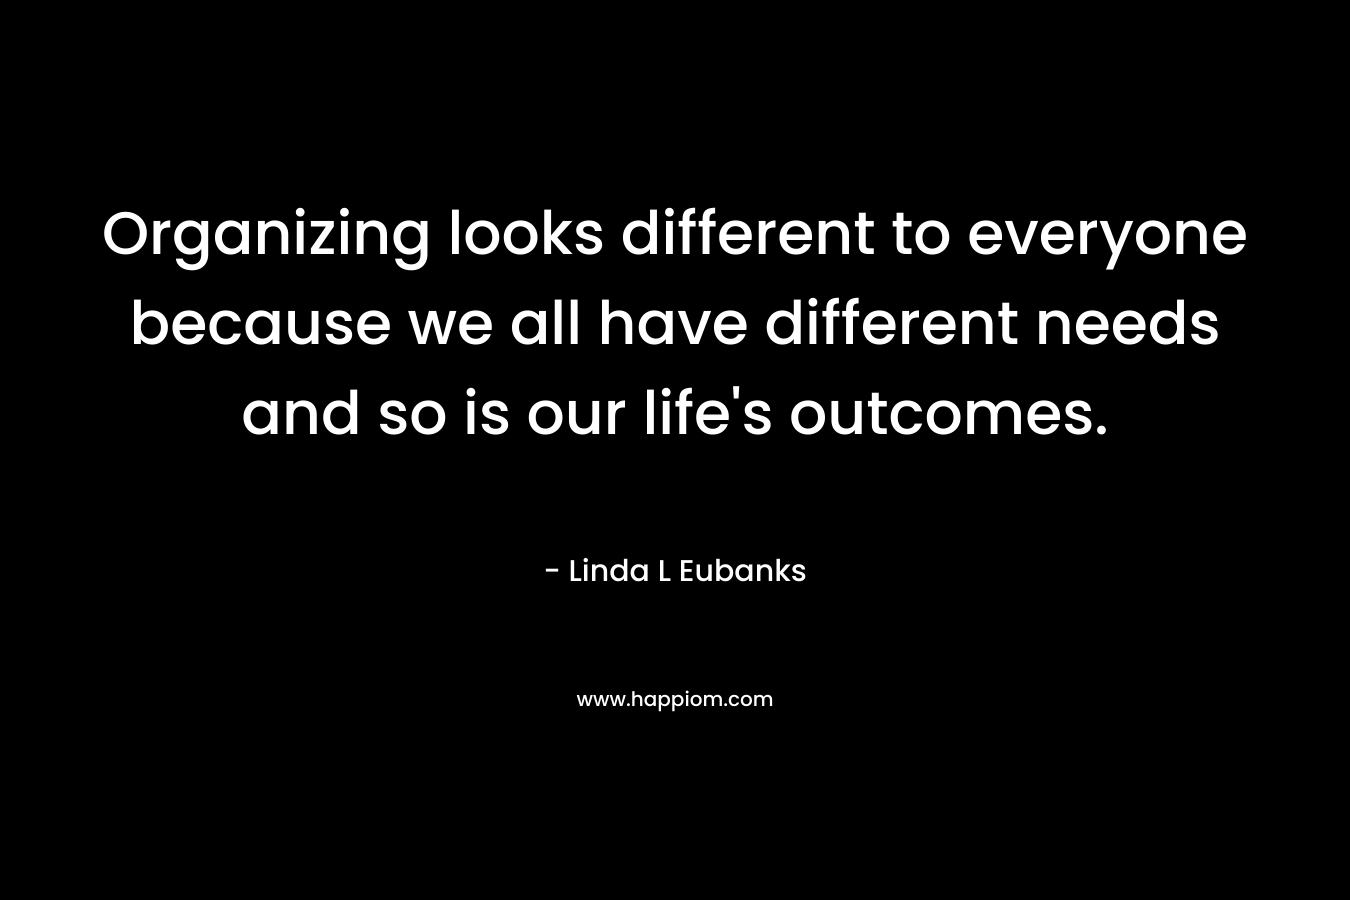 Organizing looks different to everyone because we all have different needs and so is our life's outcomes.